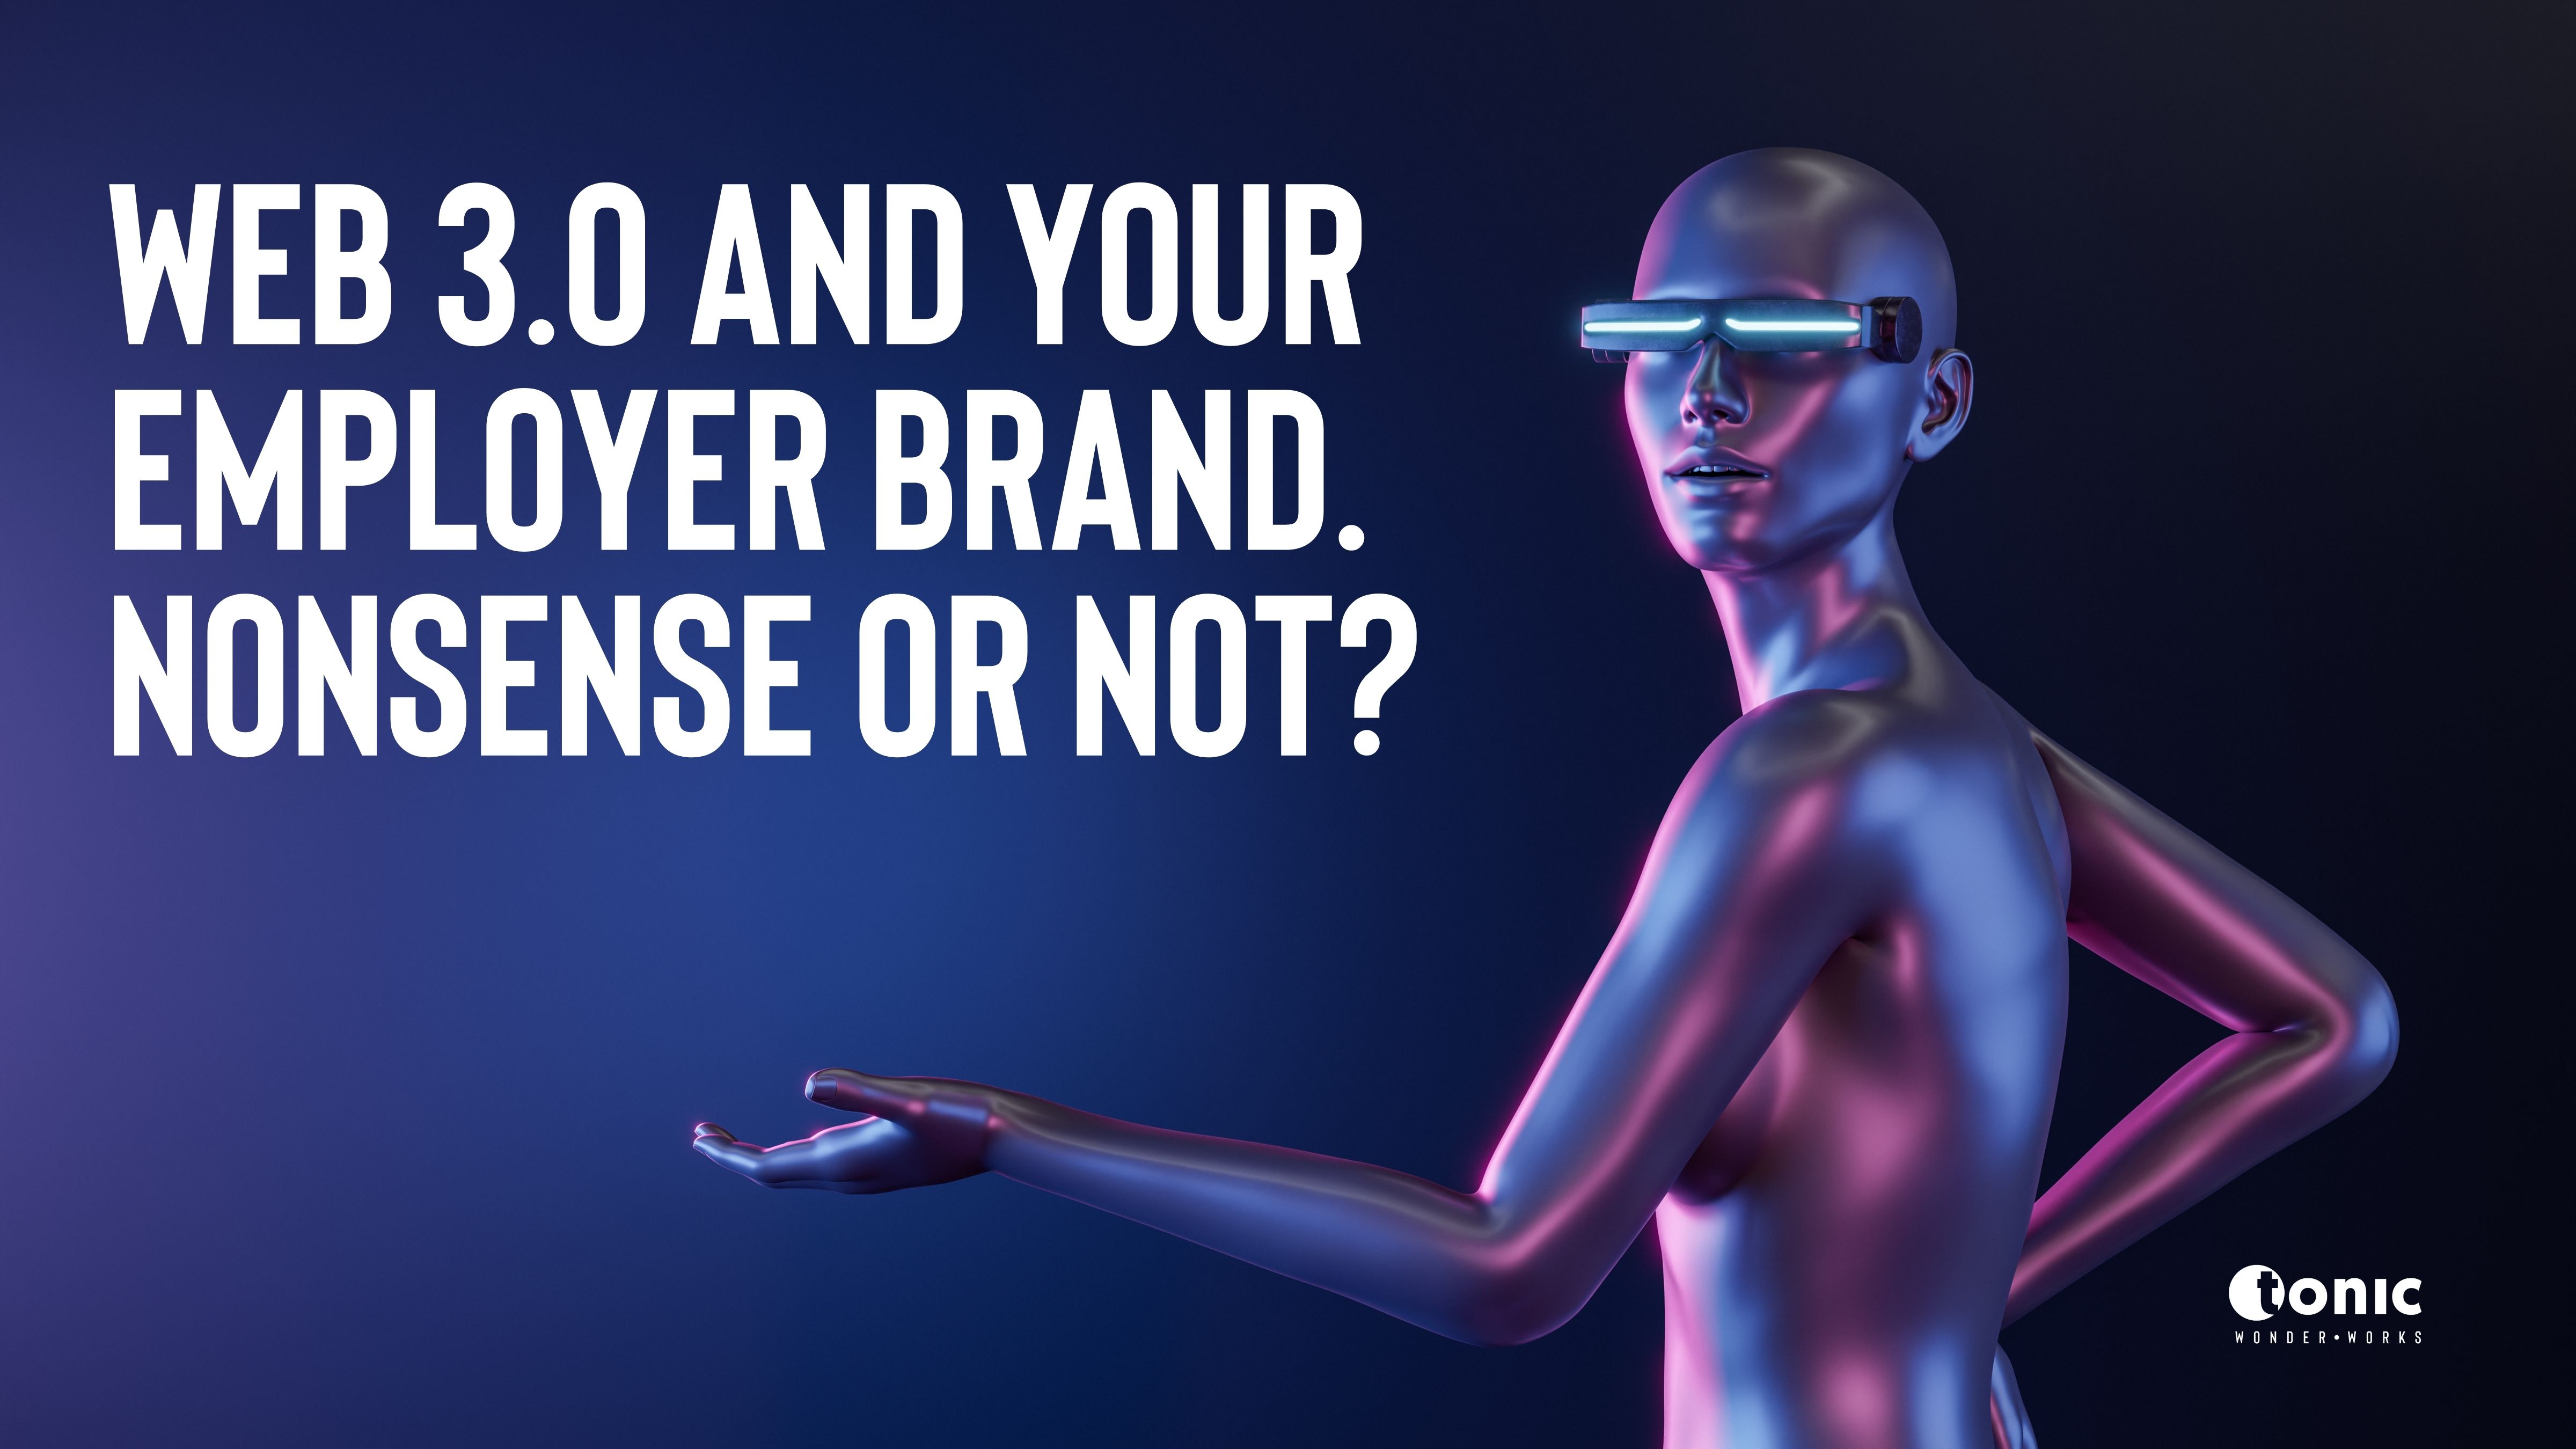 Web 3.0 and your employer brand. Nonsense or not?